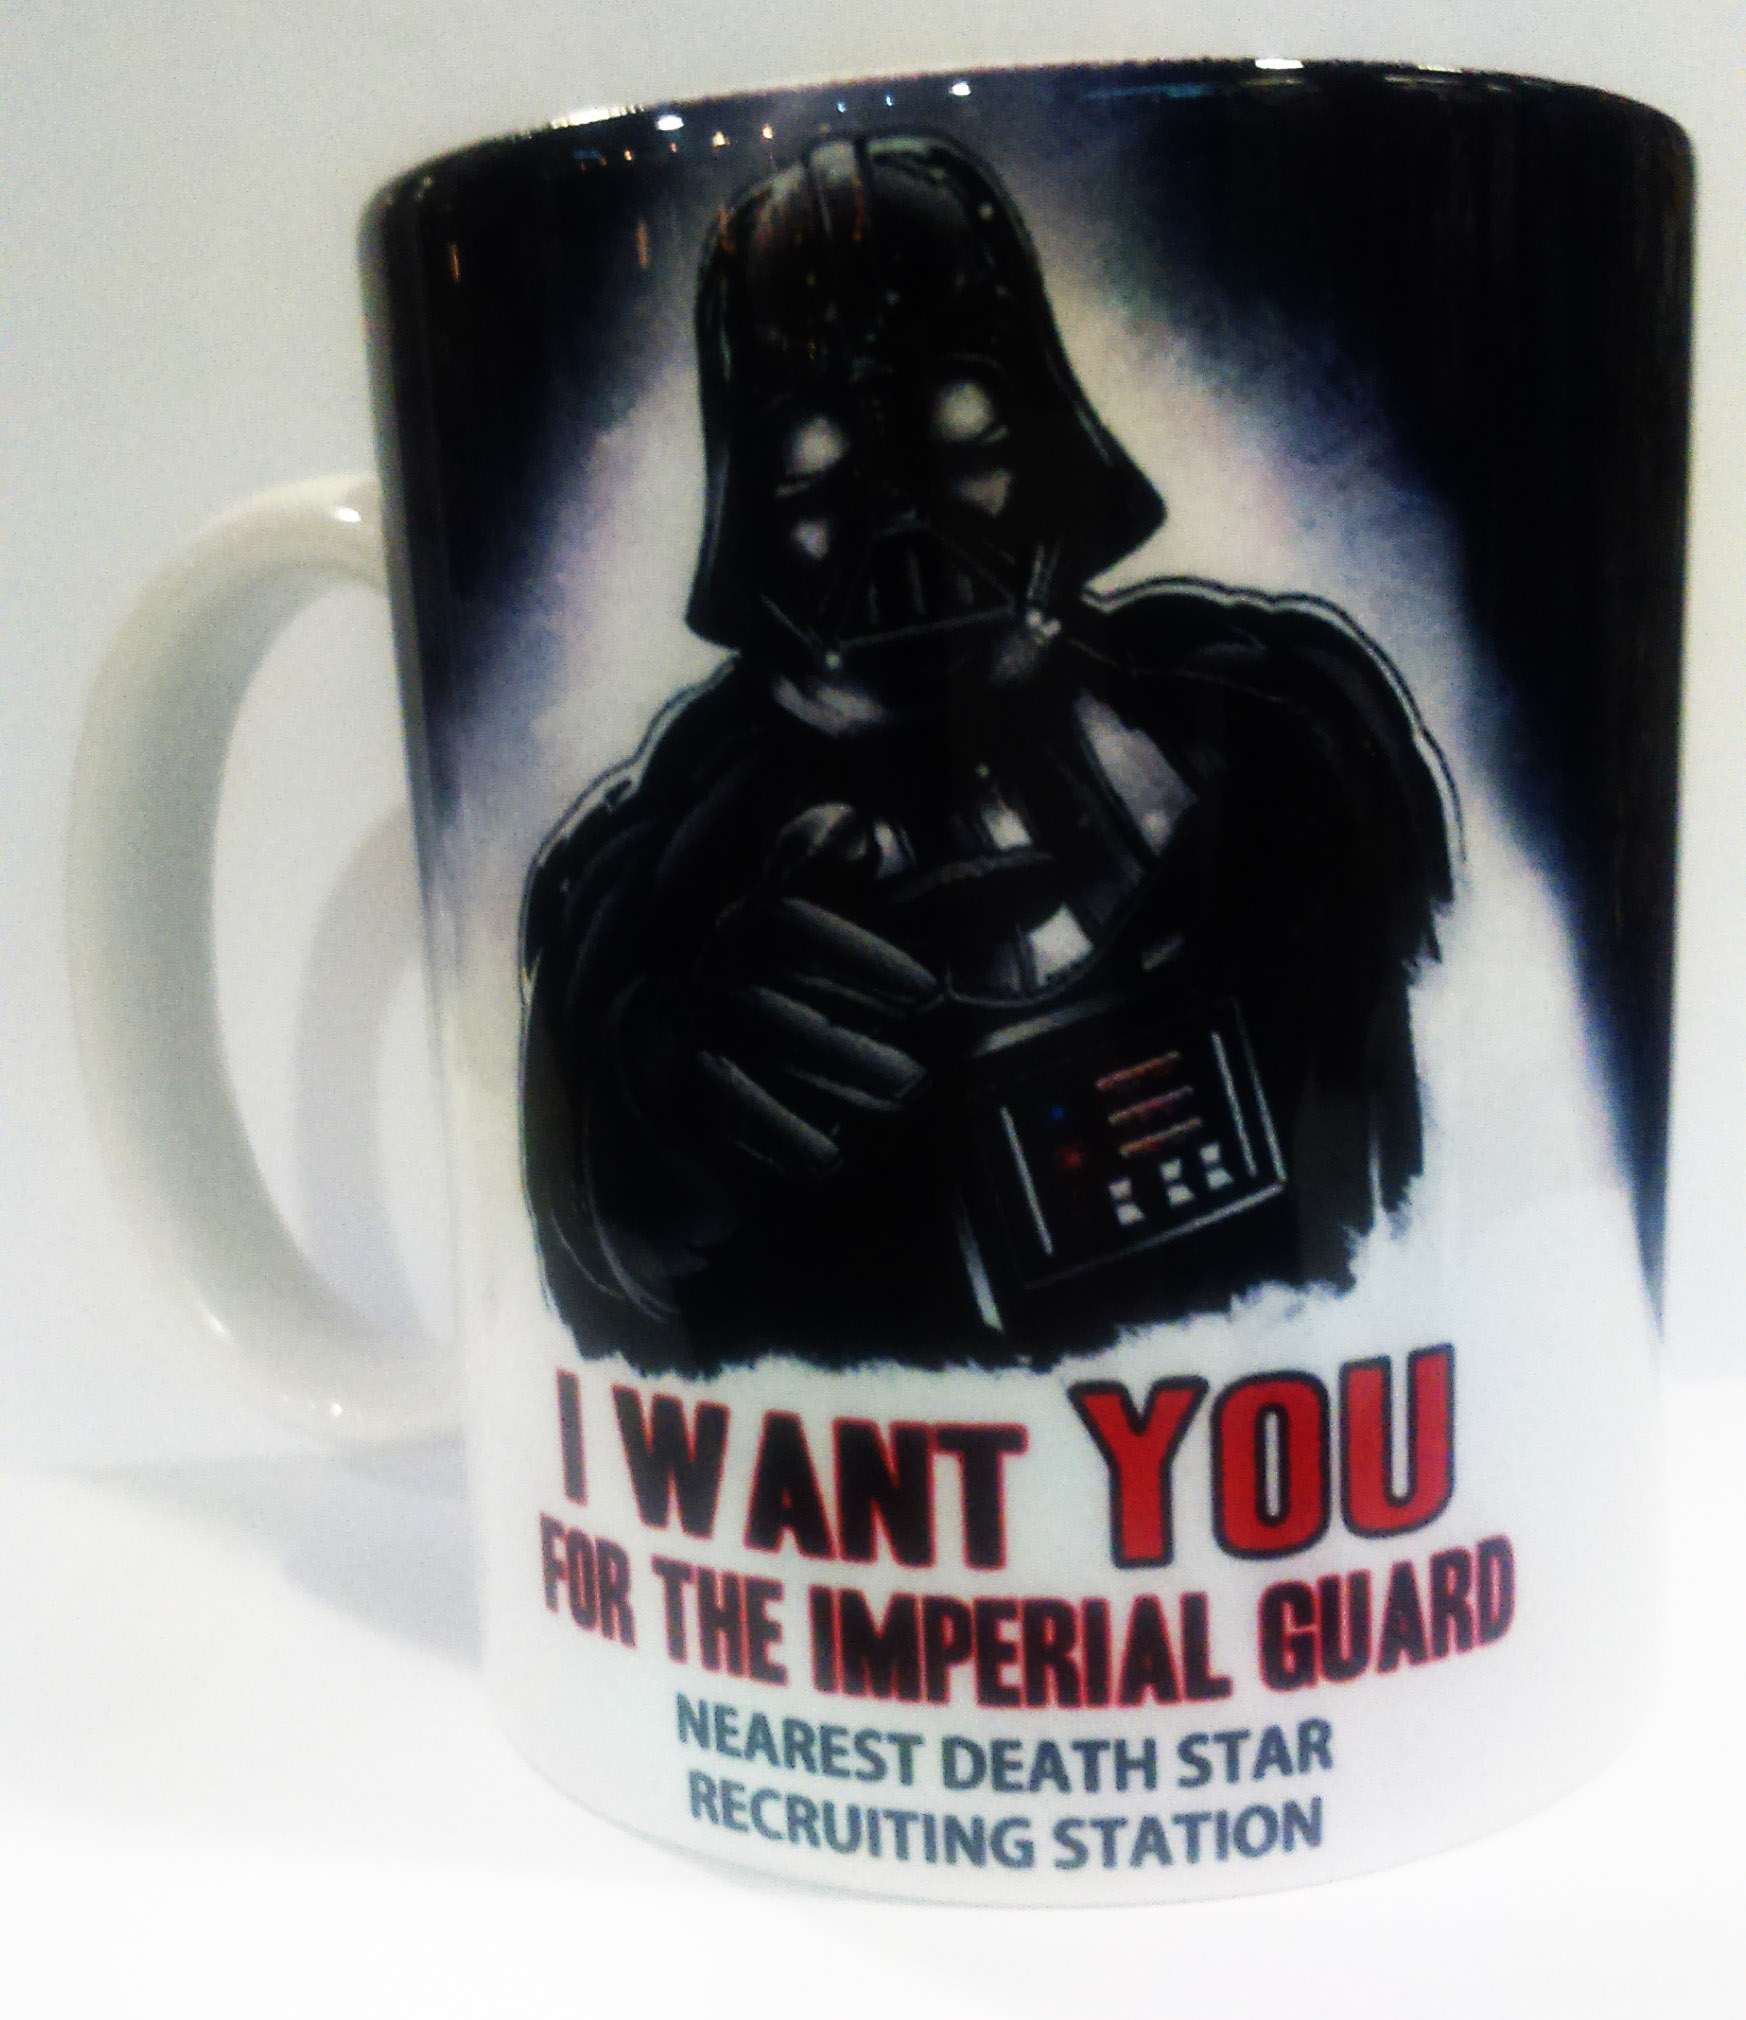 Vader: I want you for the Imperial Guard